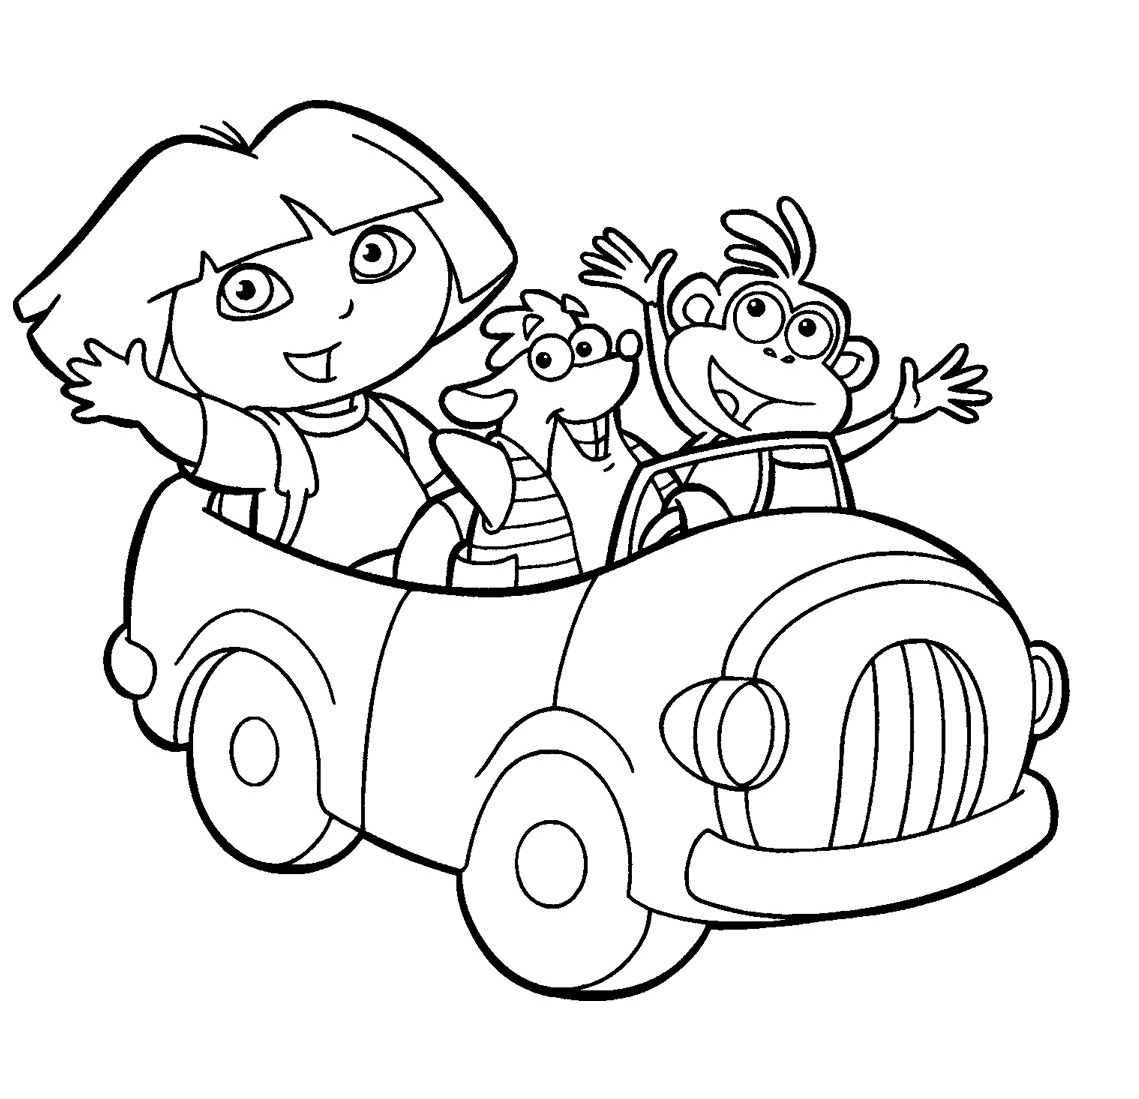 Dora Coloring Pages Printable
 dora the explorer coloring pages